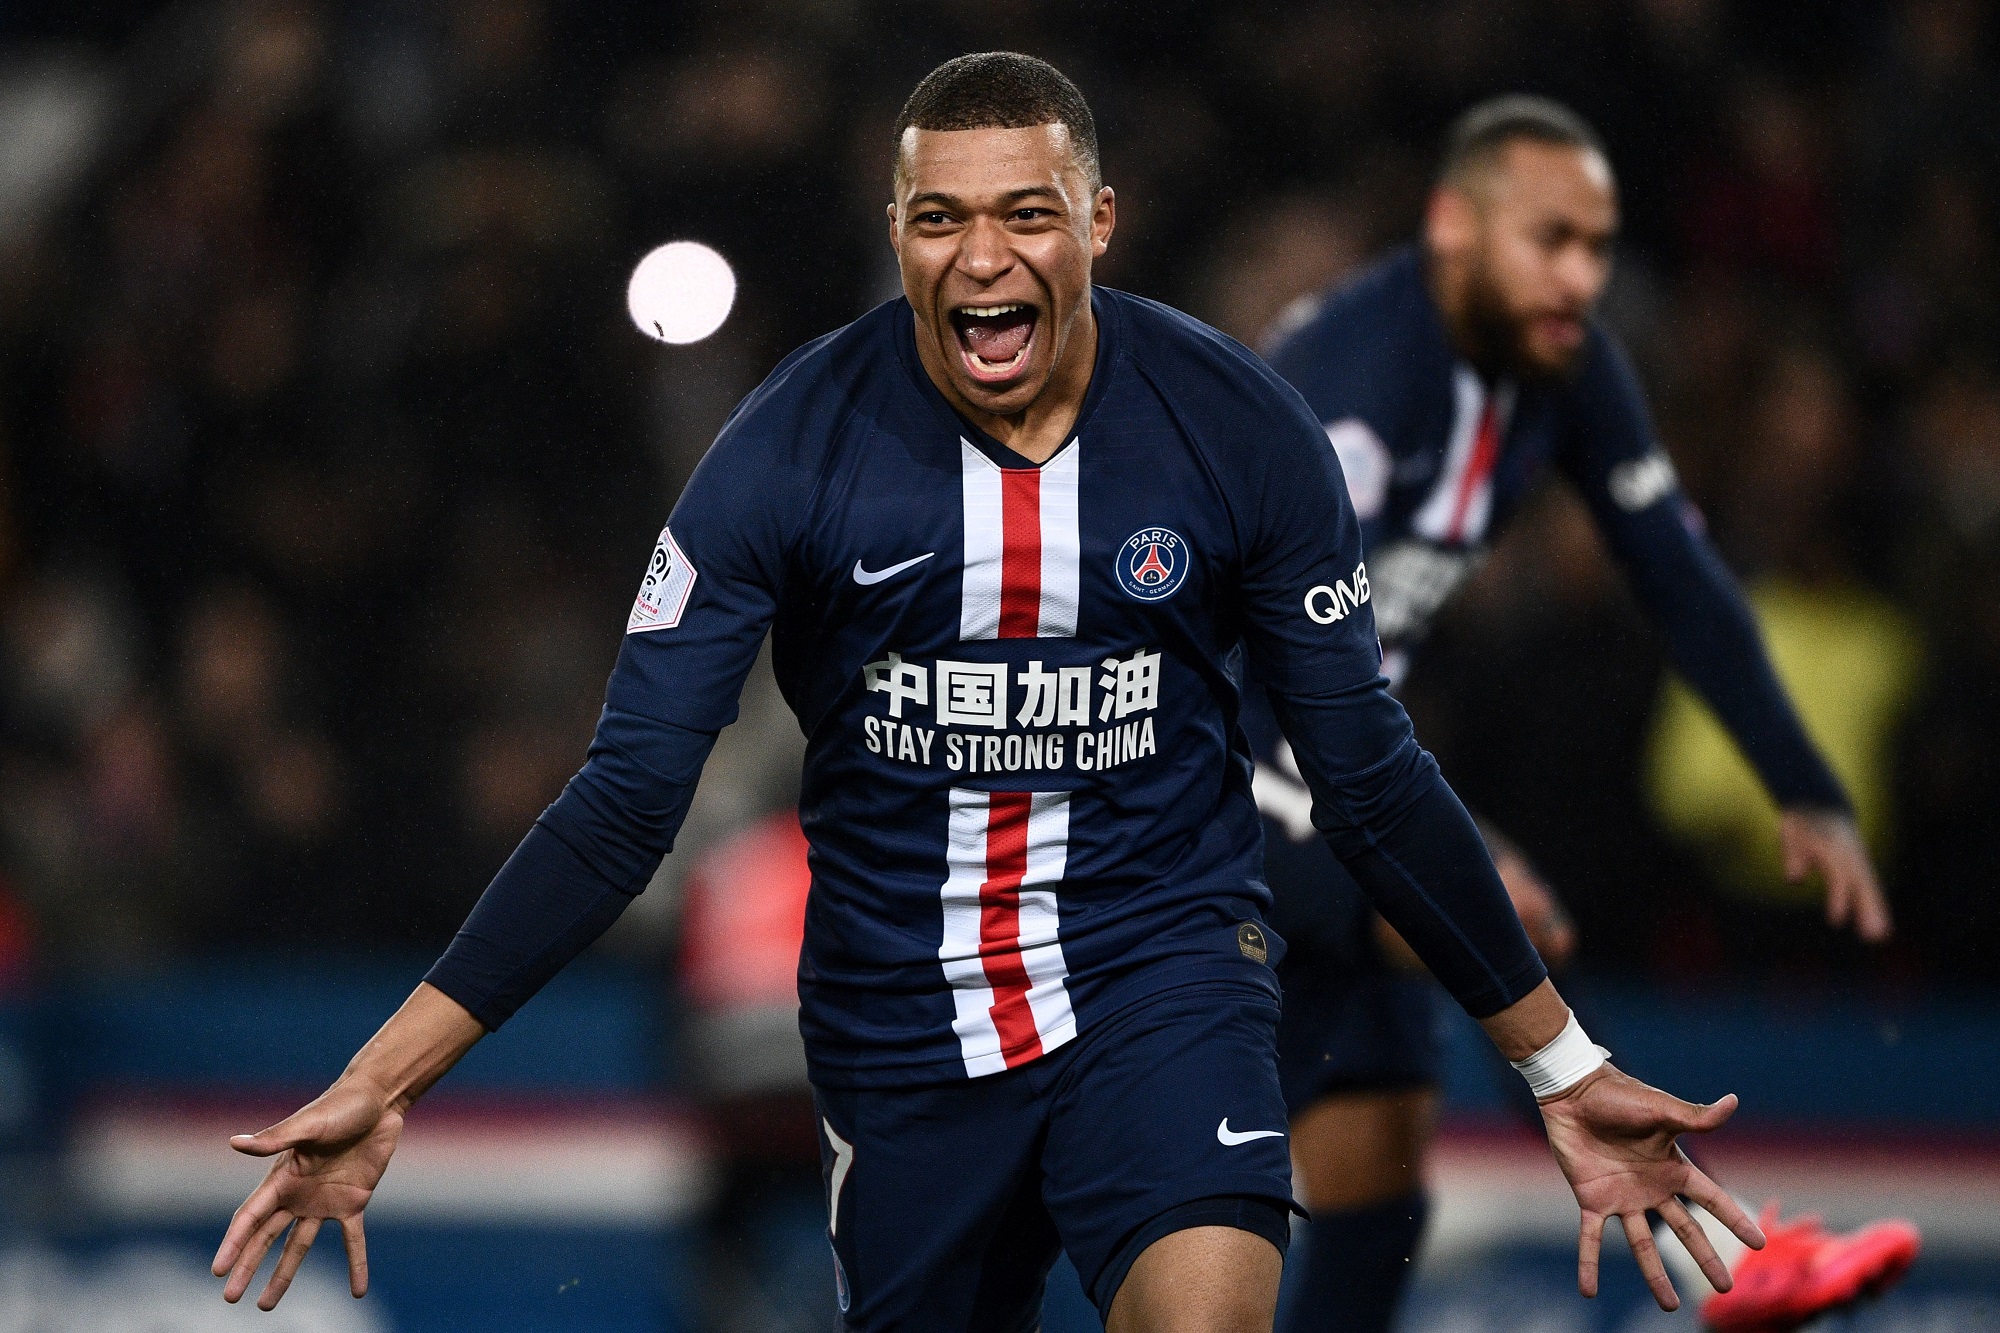 Goal Kylian Mbappe Is Now Joint Seventh In Psg S List Of Top Scorers With 8 5 Goals T Co Itga8l7yfg Twitter